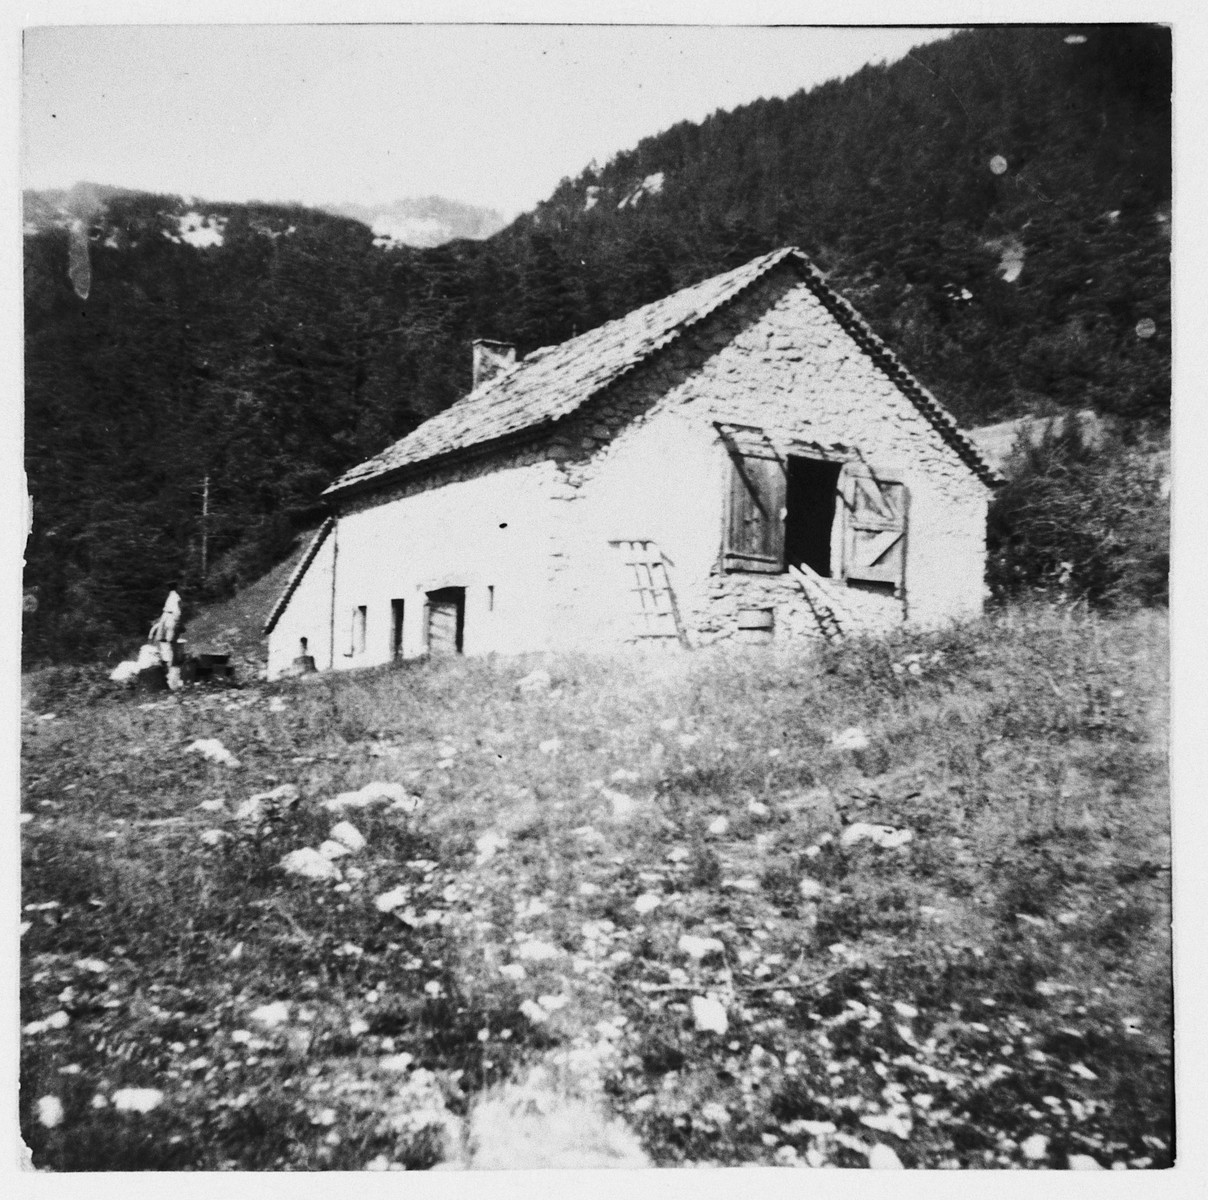 View of the mountain residence in Col de Menee where Eryk Goldfarb hid out during the German occupation of France.